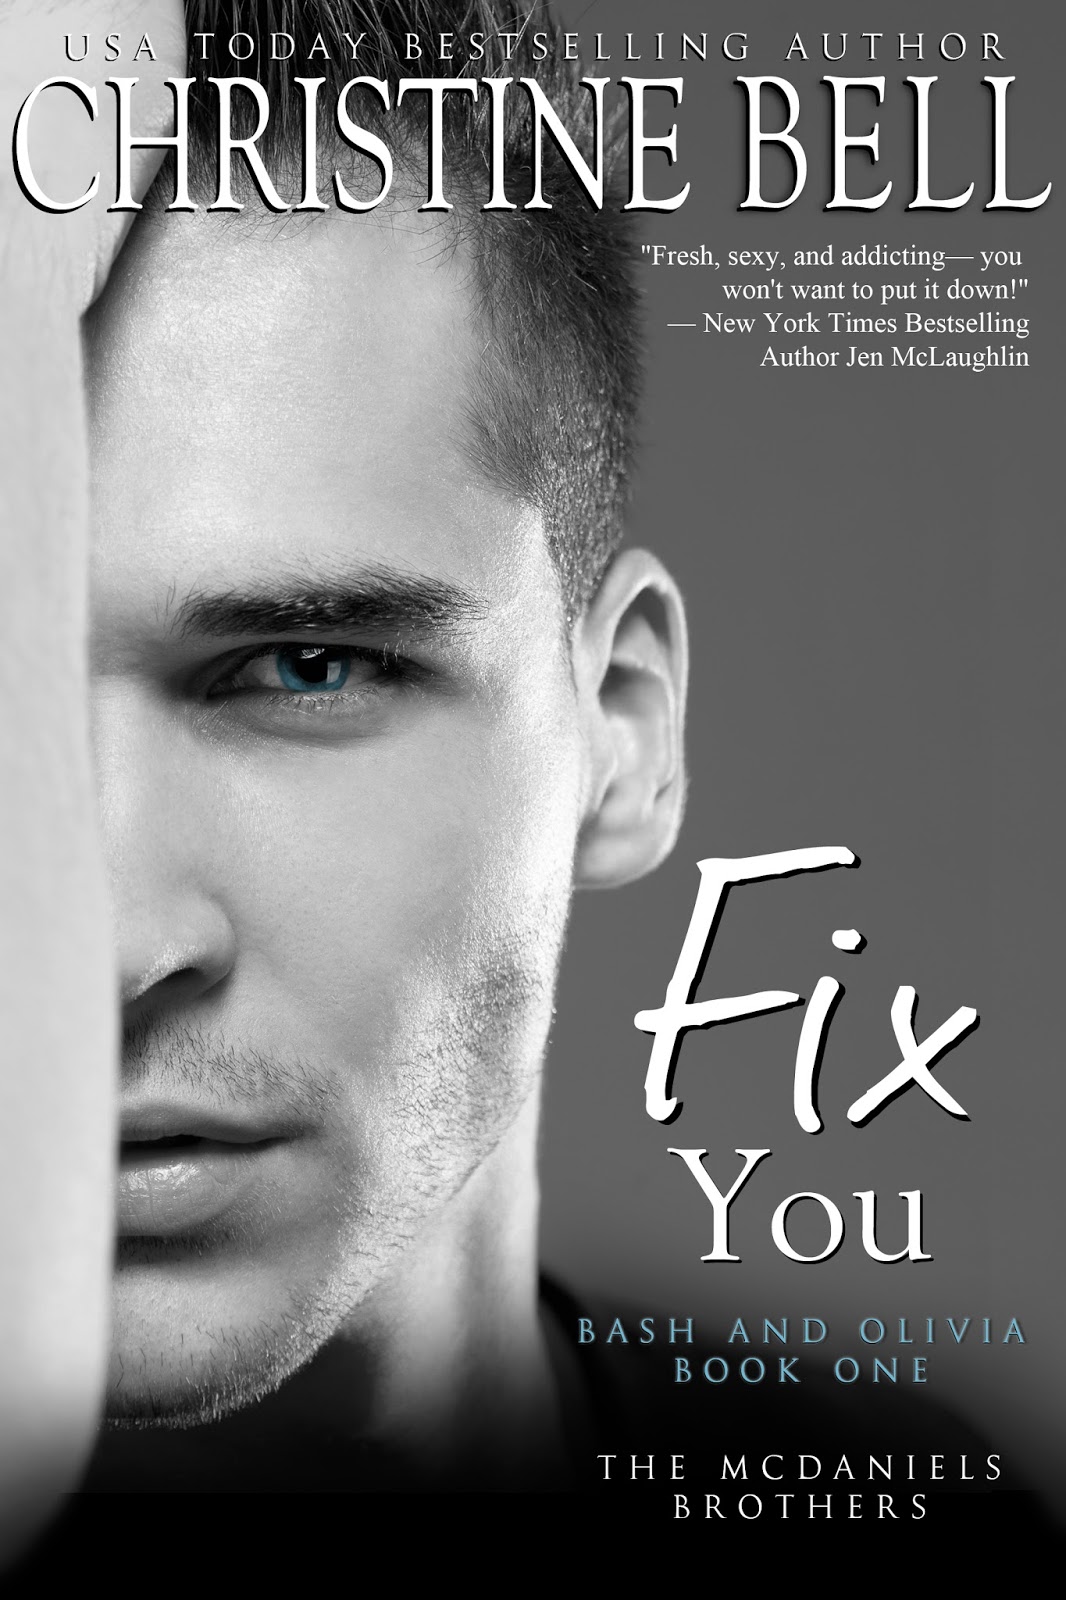 Christine Bell - Author: Fix You, Book One (New Adult romance), comes ...